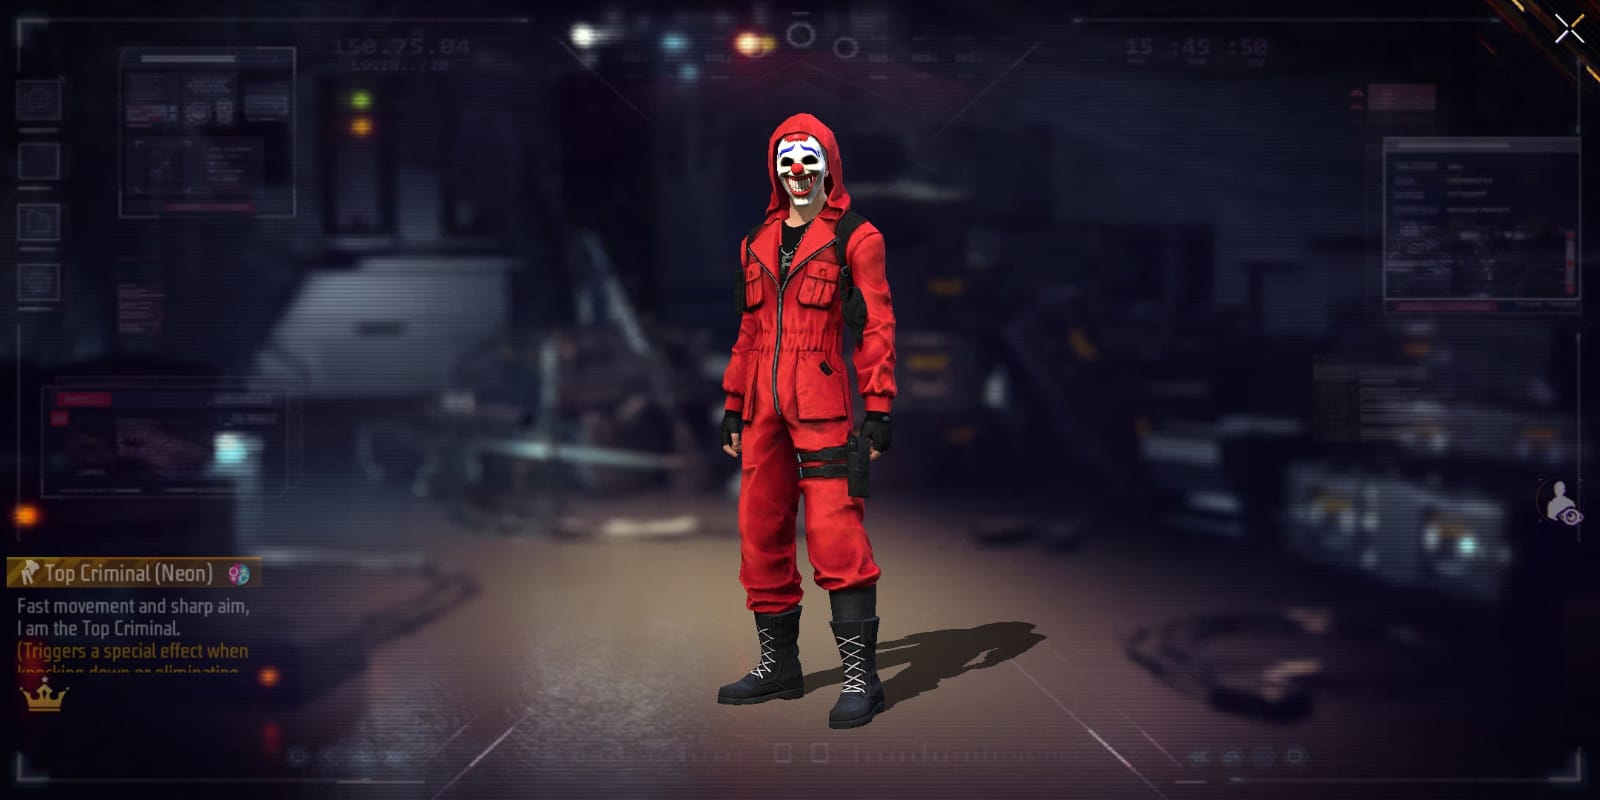 Free Fire Glitch Ascension Event - Criminal Token Tower event arrives in-game, CHECK HOW to get Neon Top Criminal Bundle, Gloo wall skin, and other rewards.